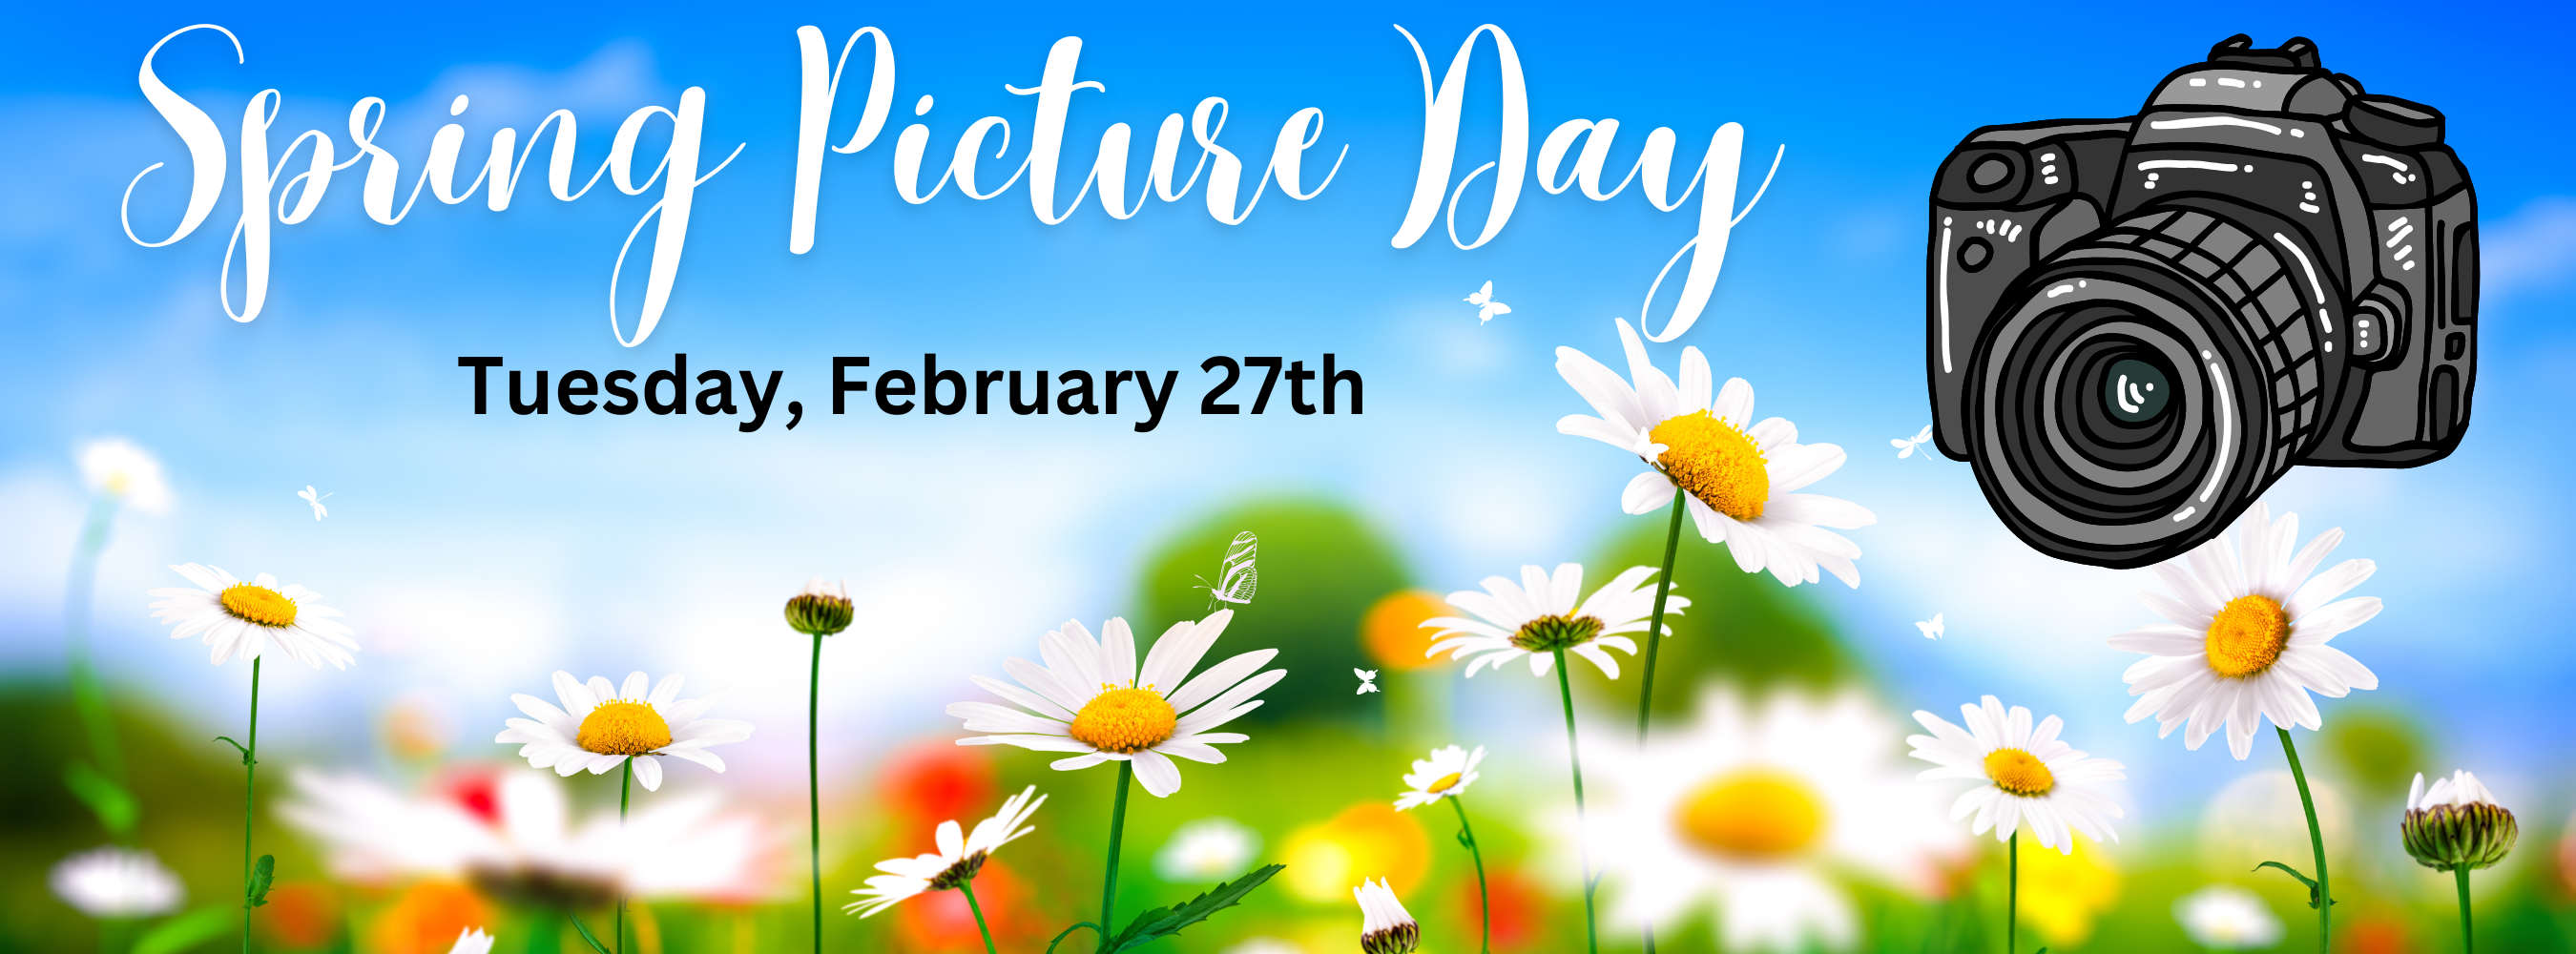 spring picture day information